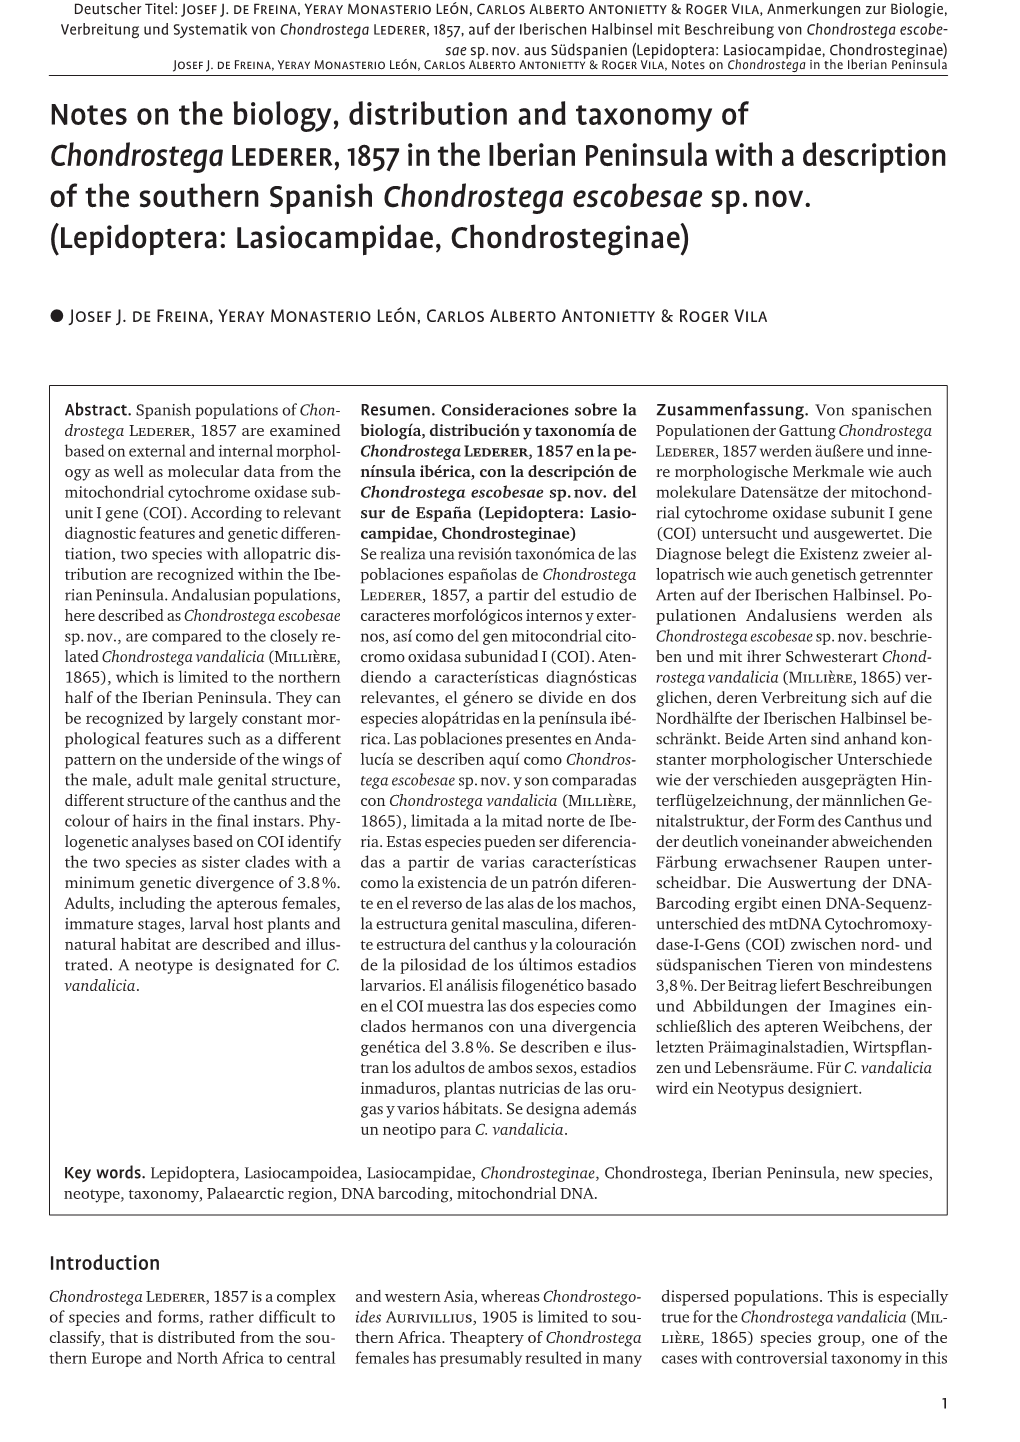 Notes on the Biology, Distribution and Taxonomy of Chondrostegalederer